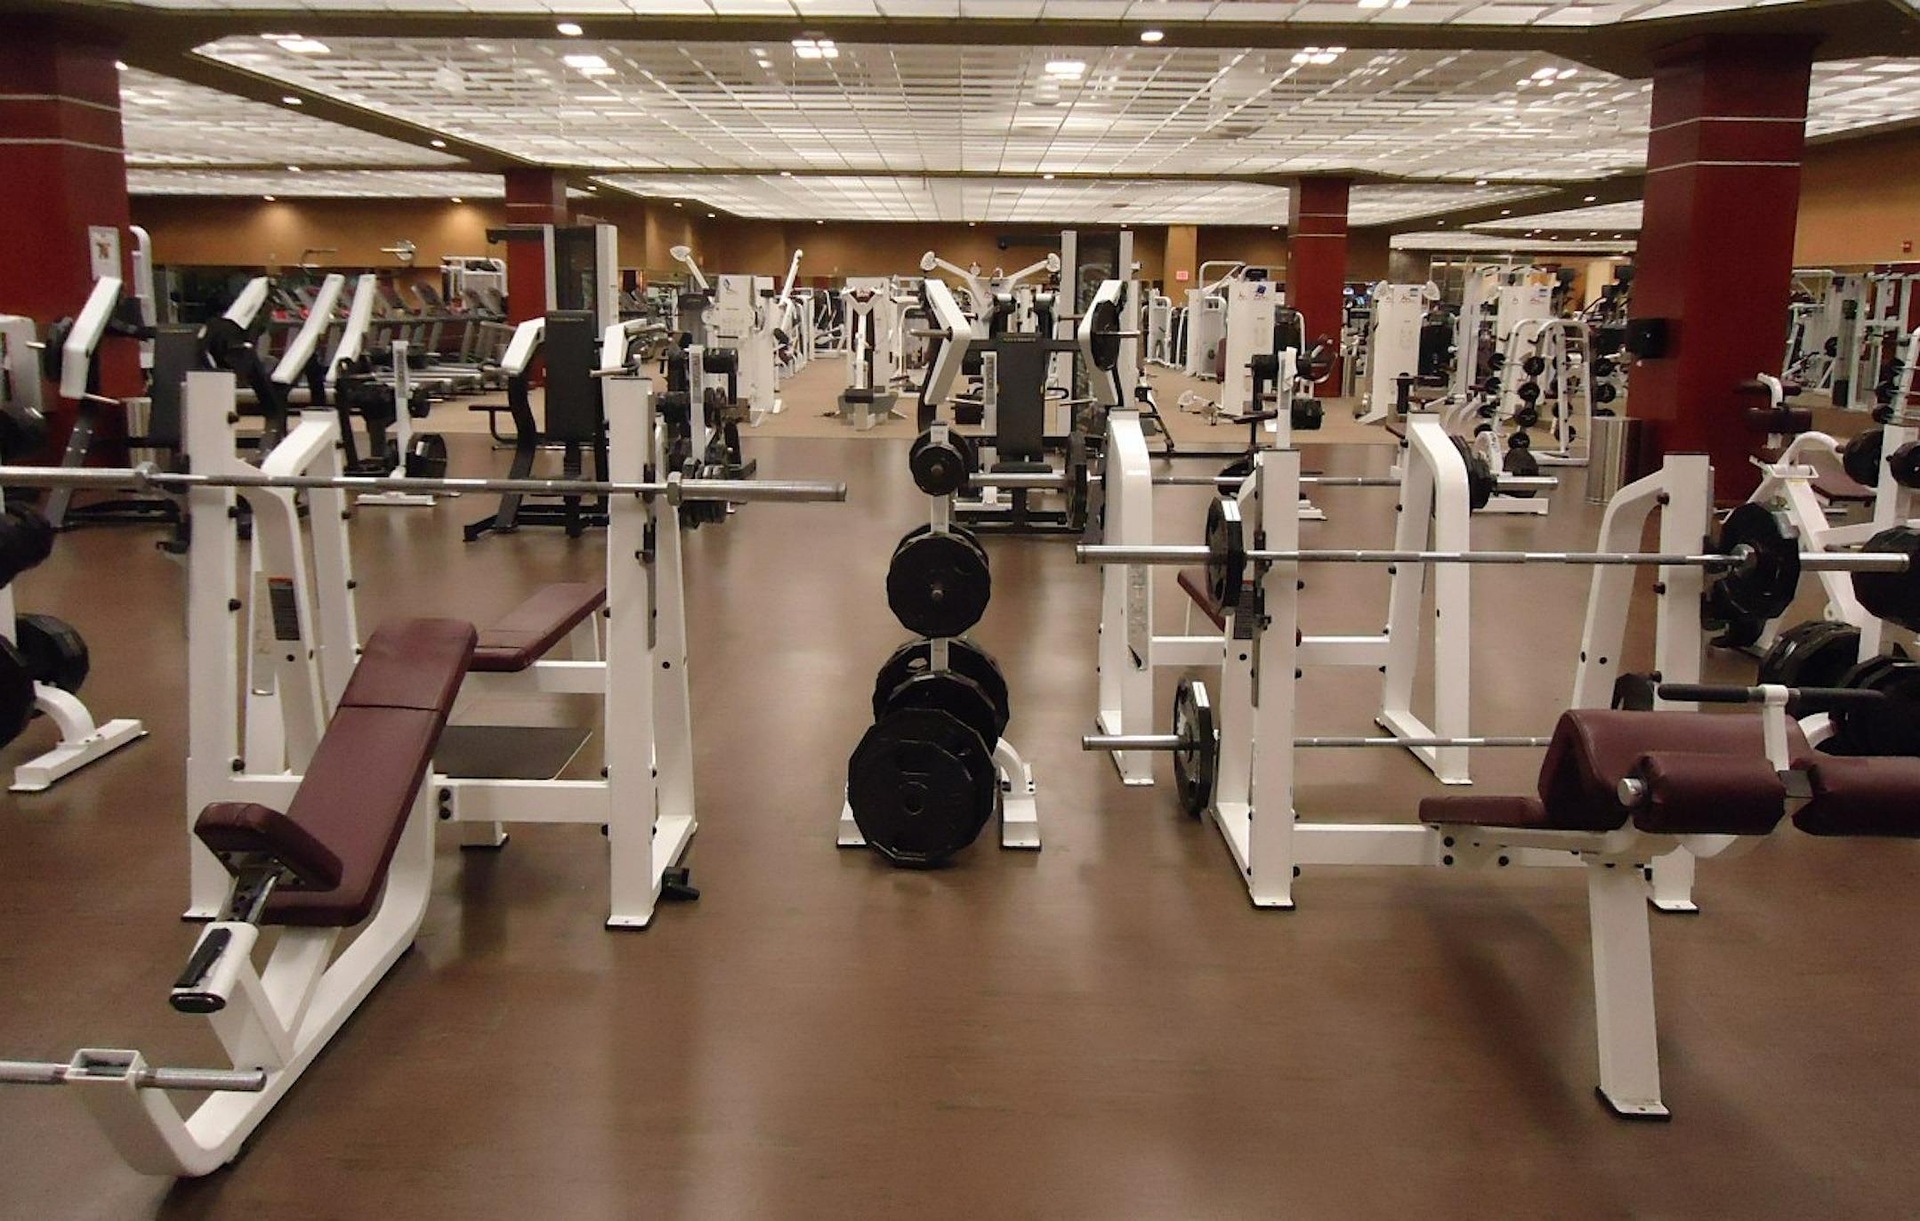 How to Attract Customers to Gym Using Digital Marketing